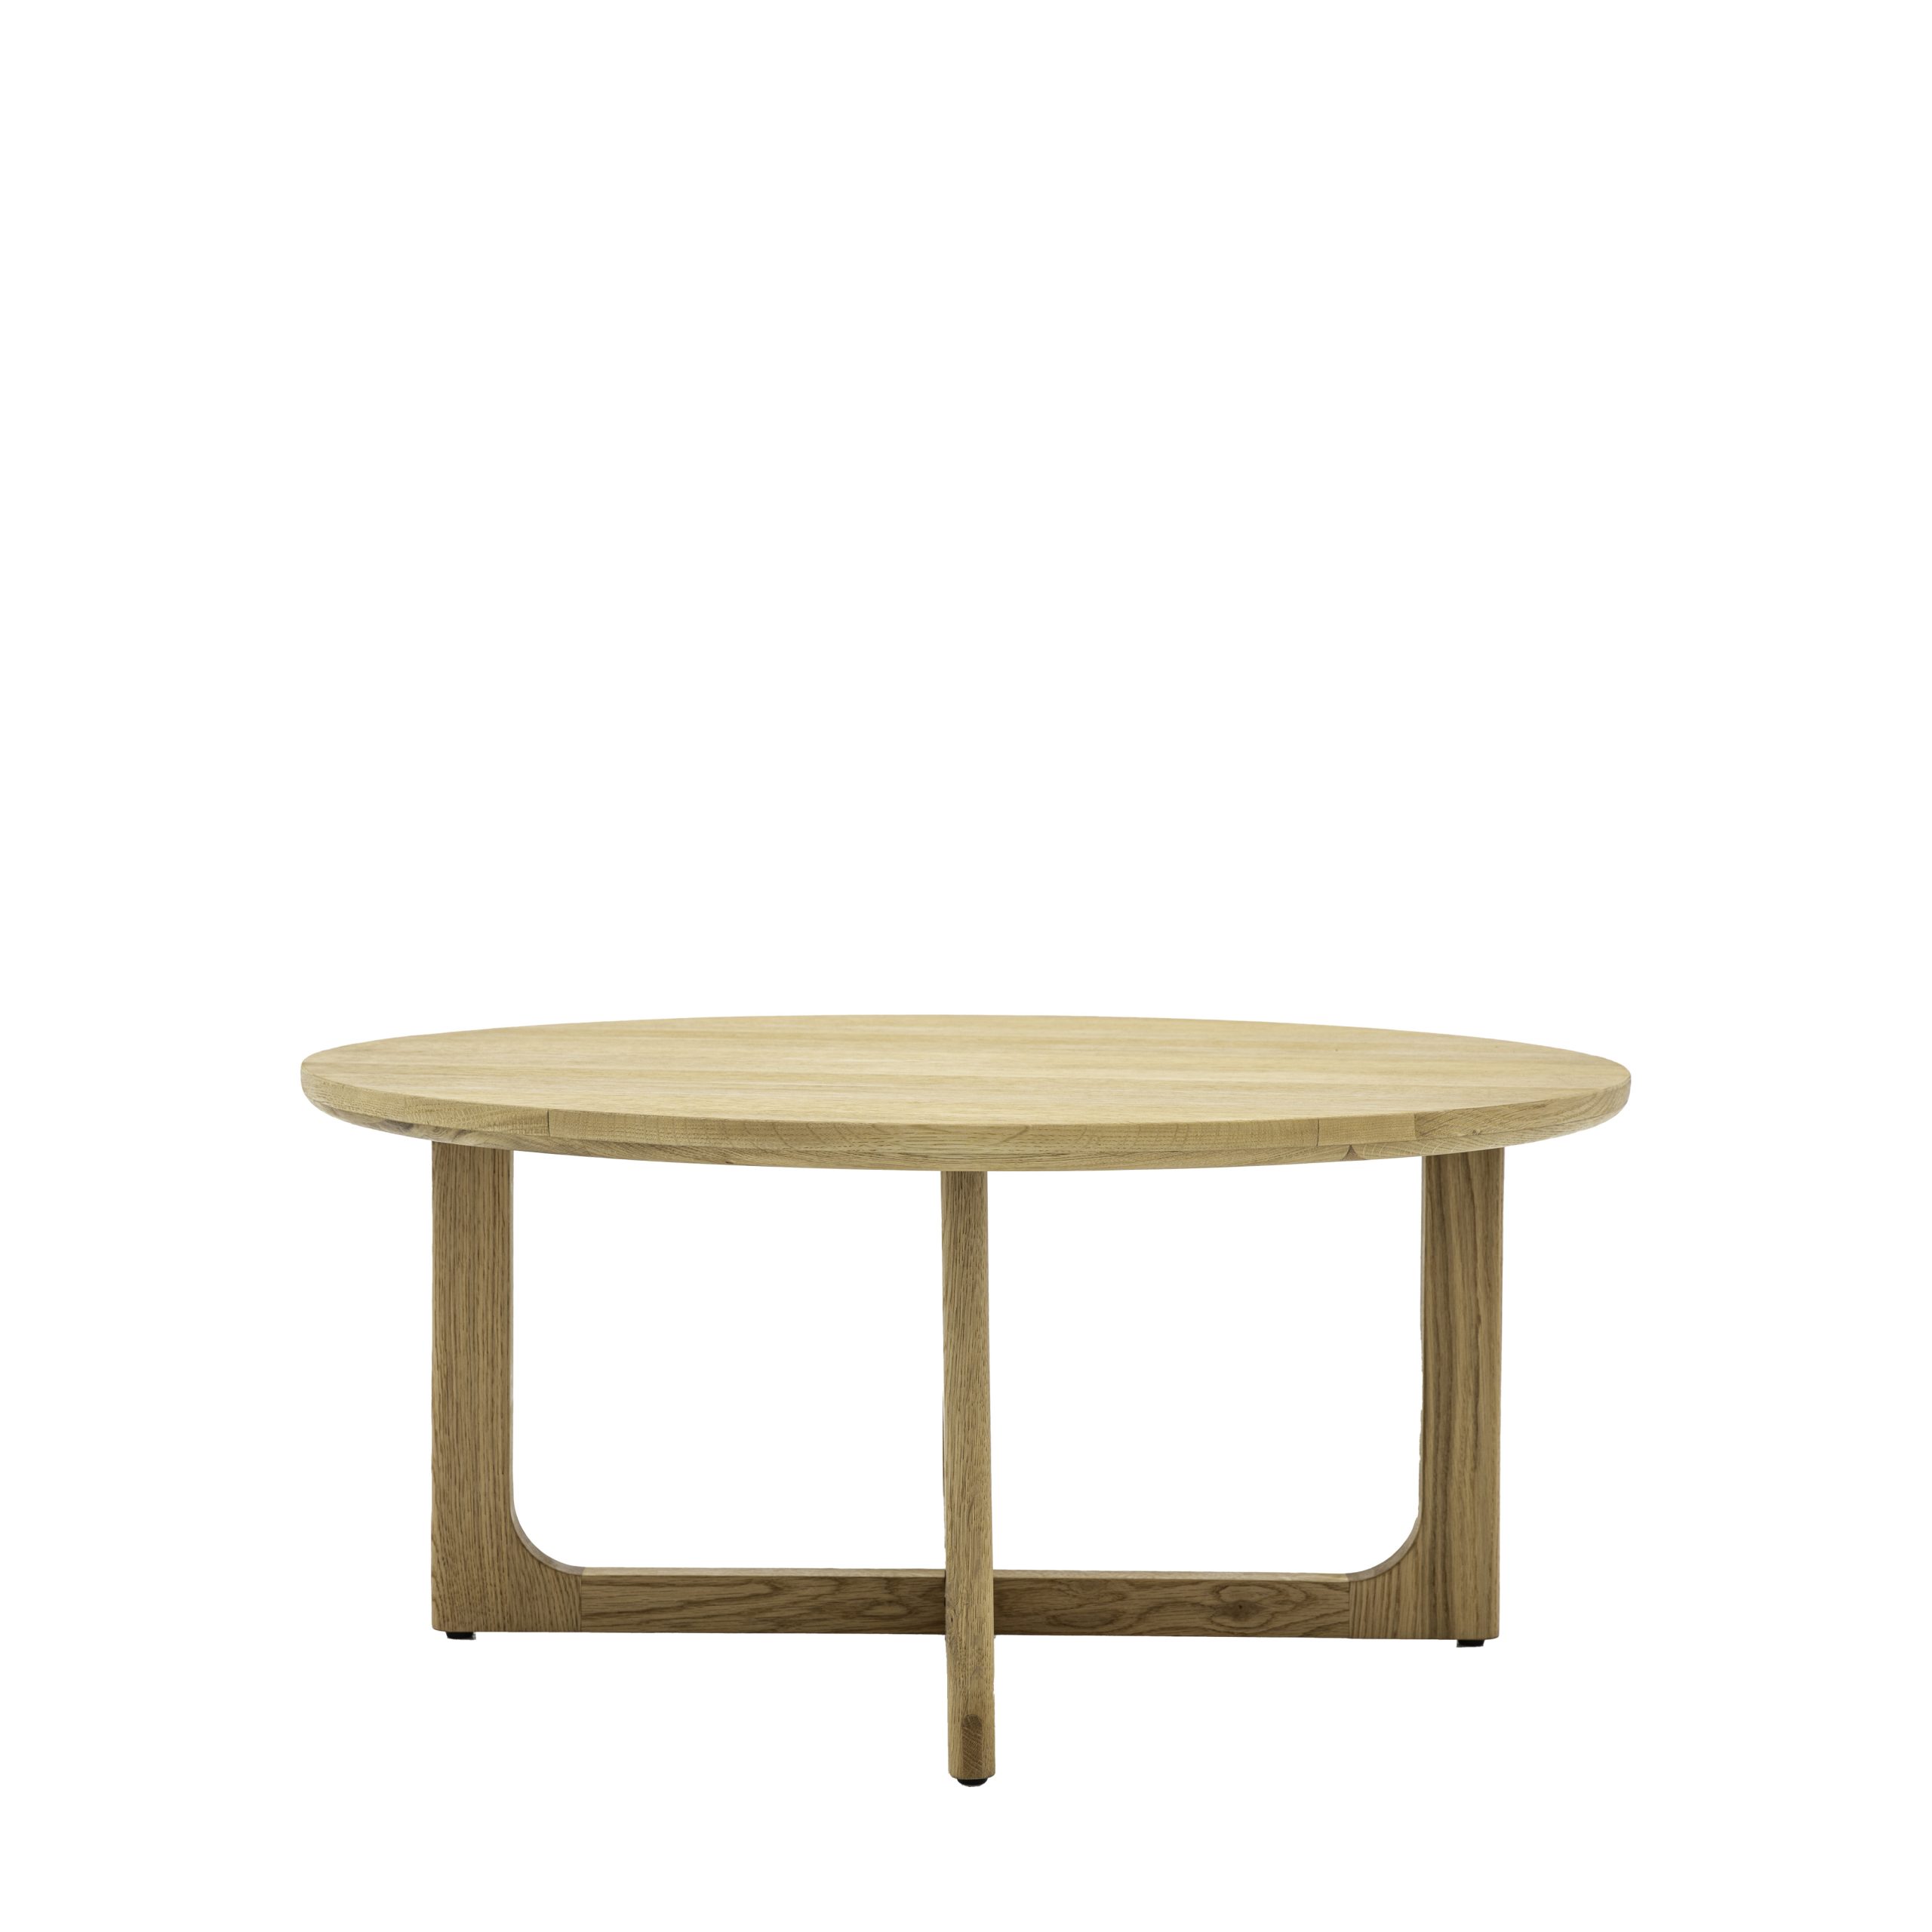 Gallery Direct Craft Round Coffee Table Natural